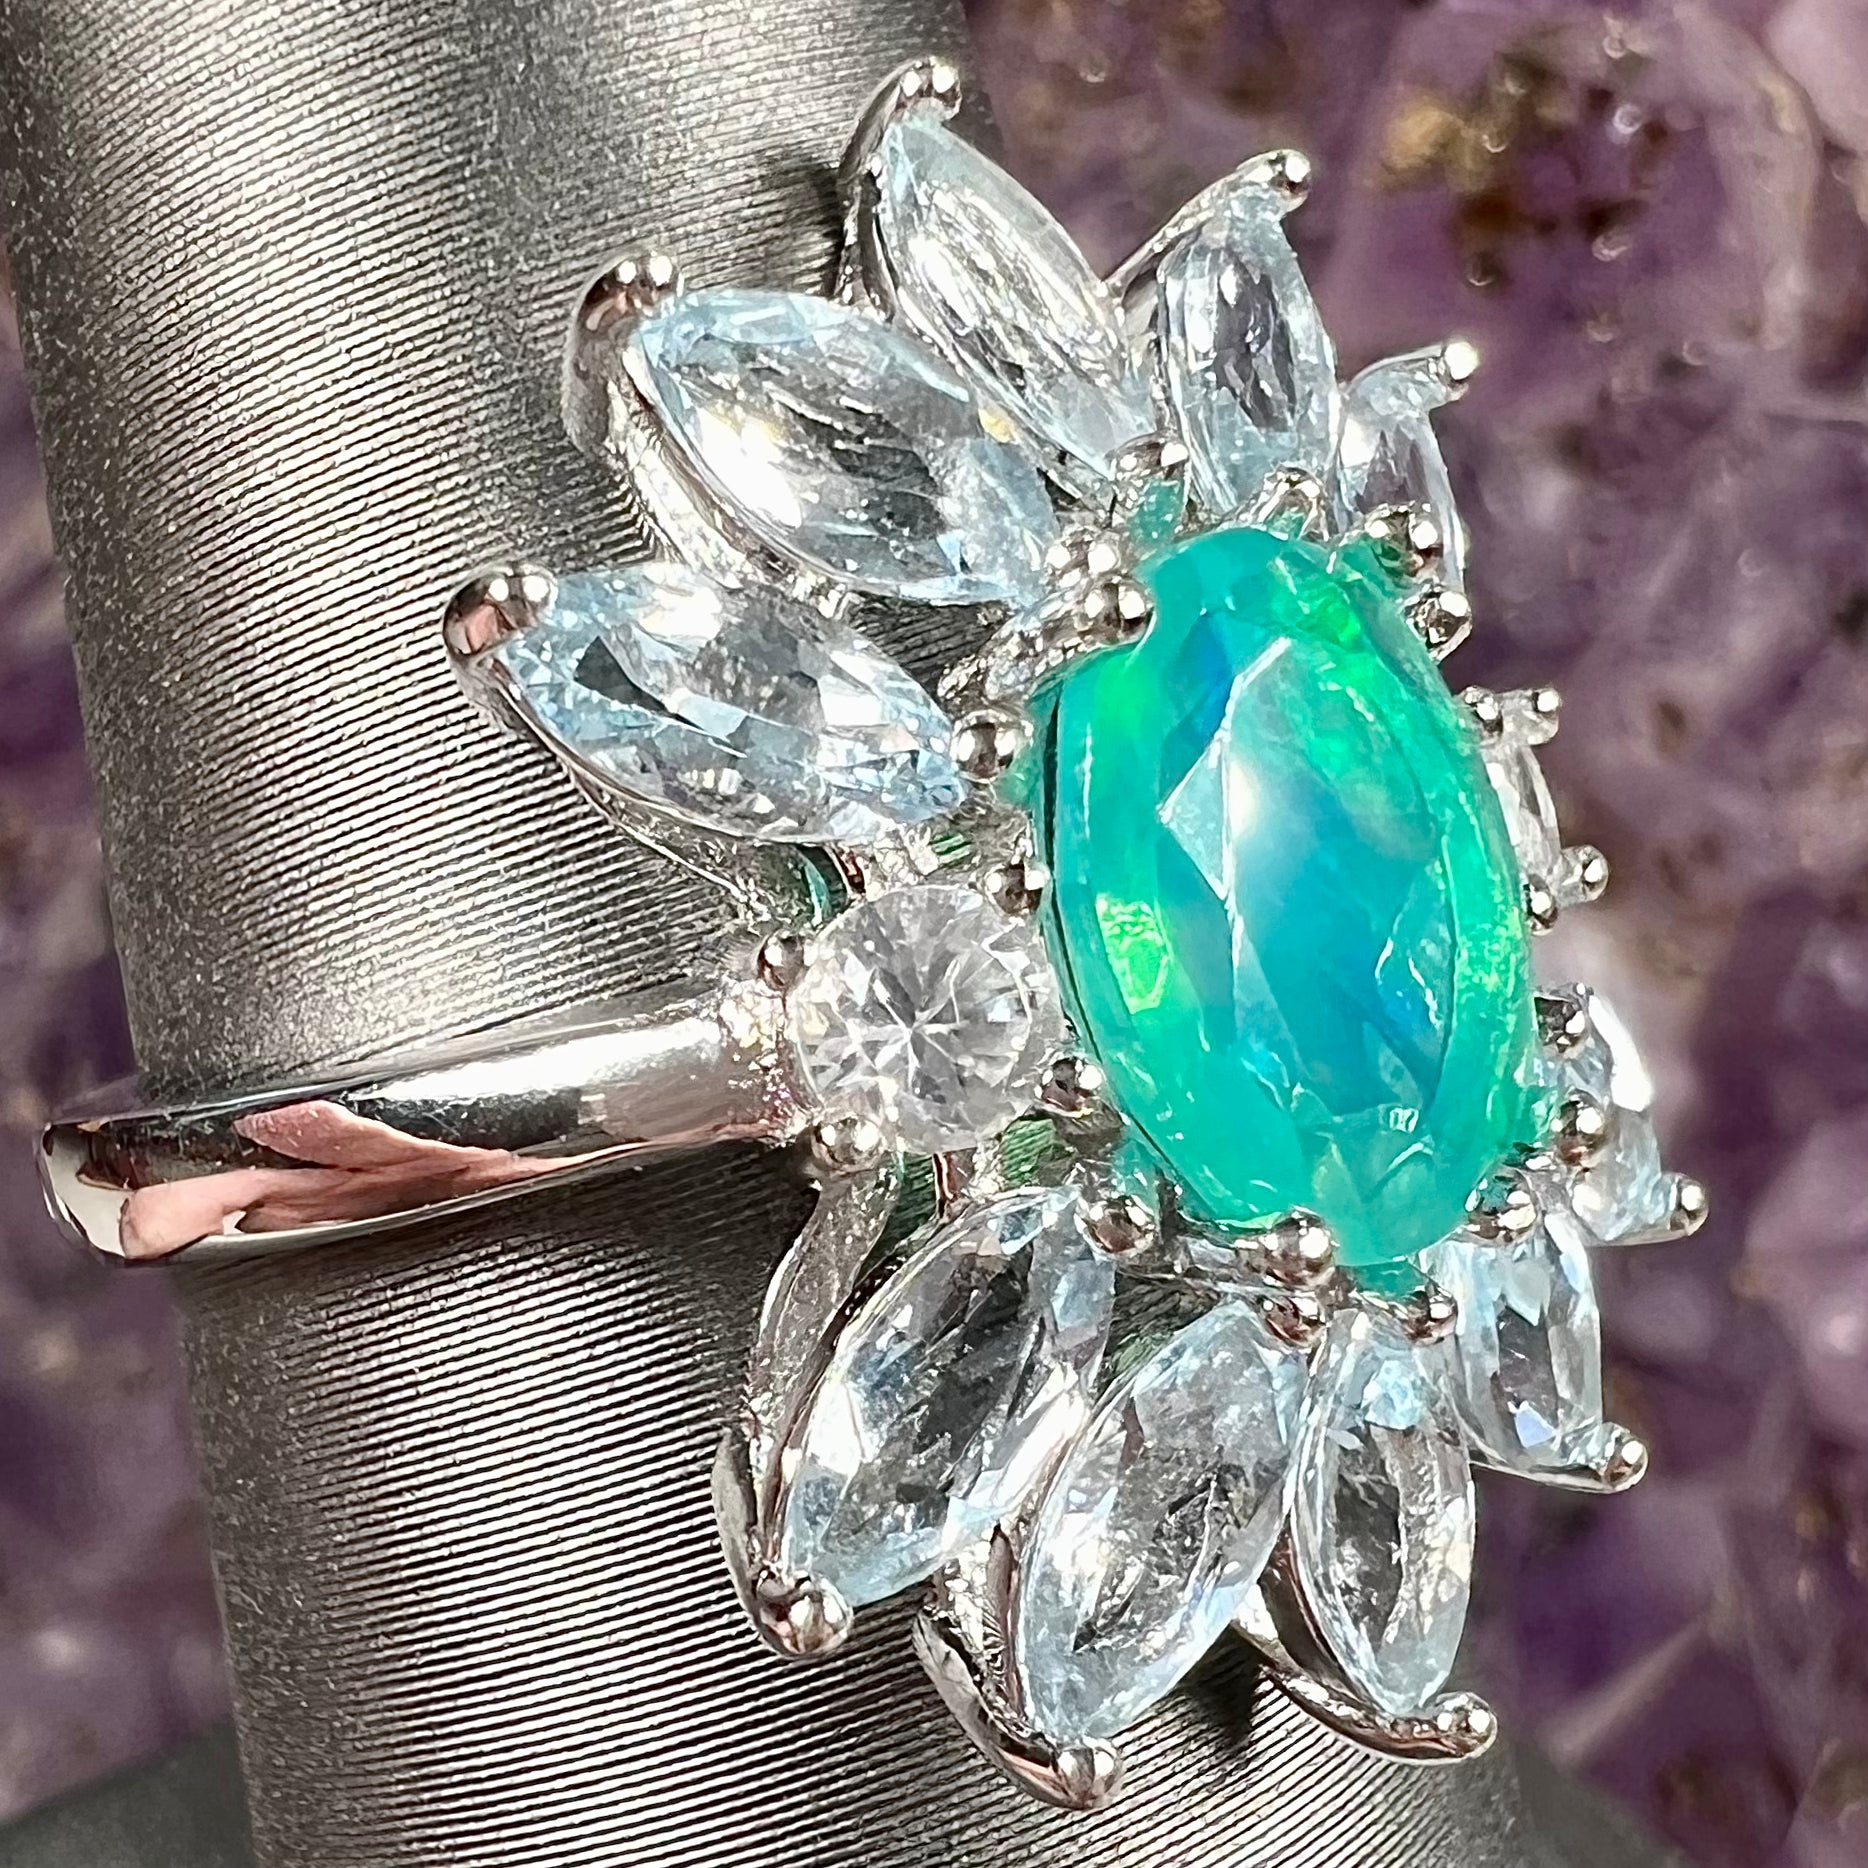 A faceted oval cut blue Ethiopian fire opal set in a sterling silver ring with marquise cut blue topaz stones.